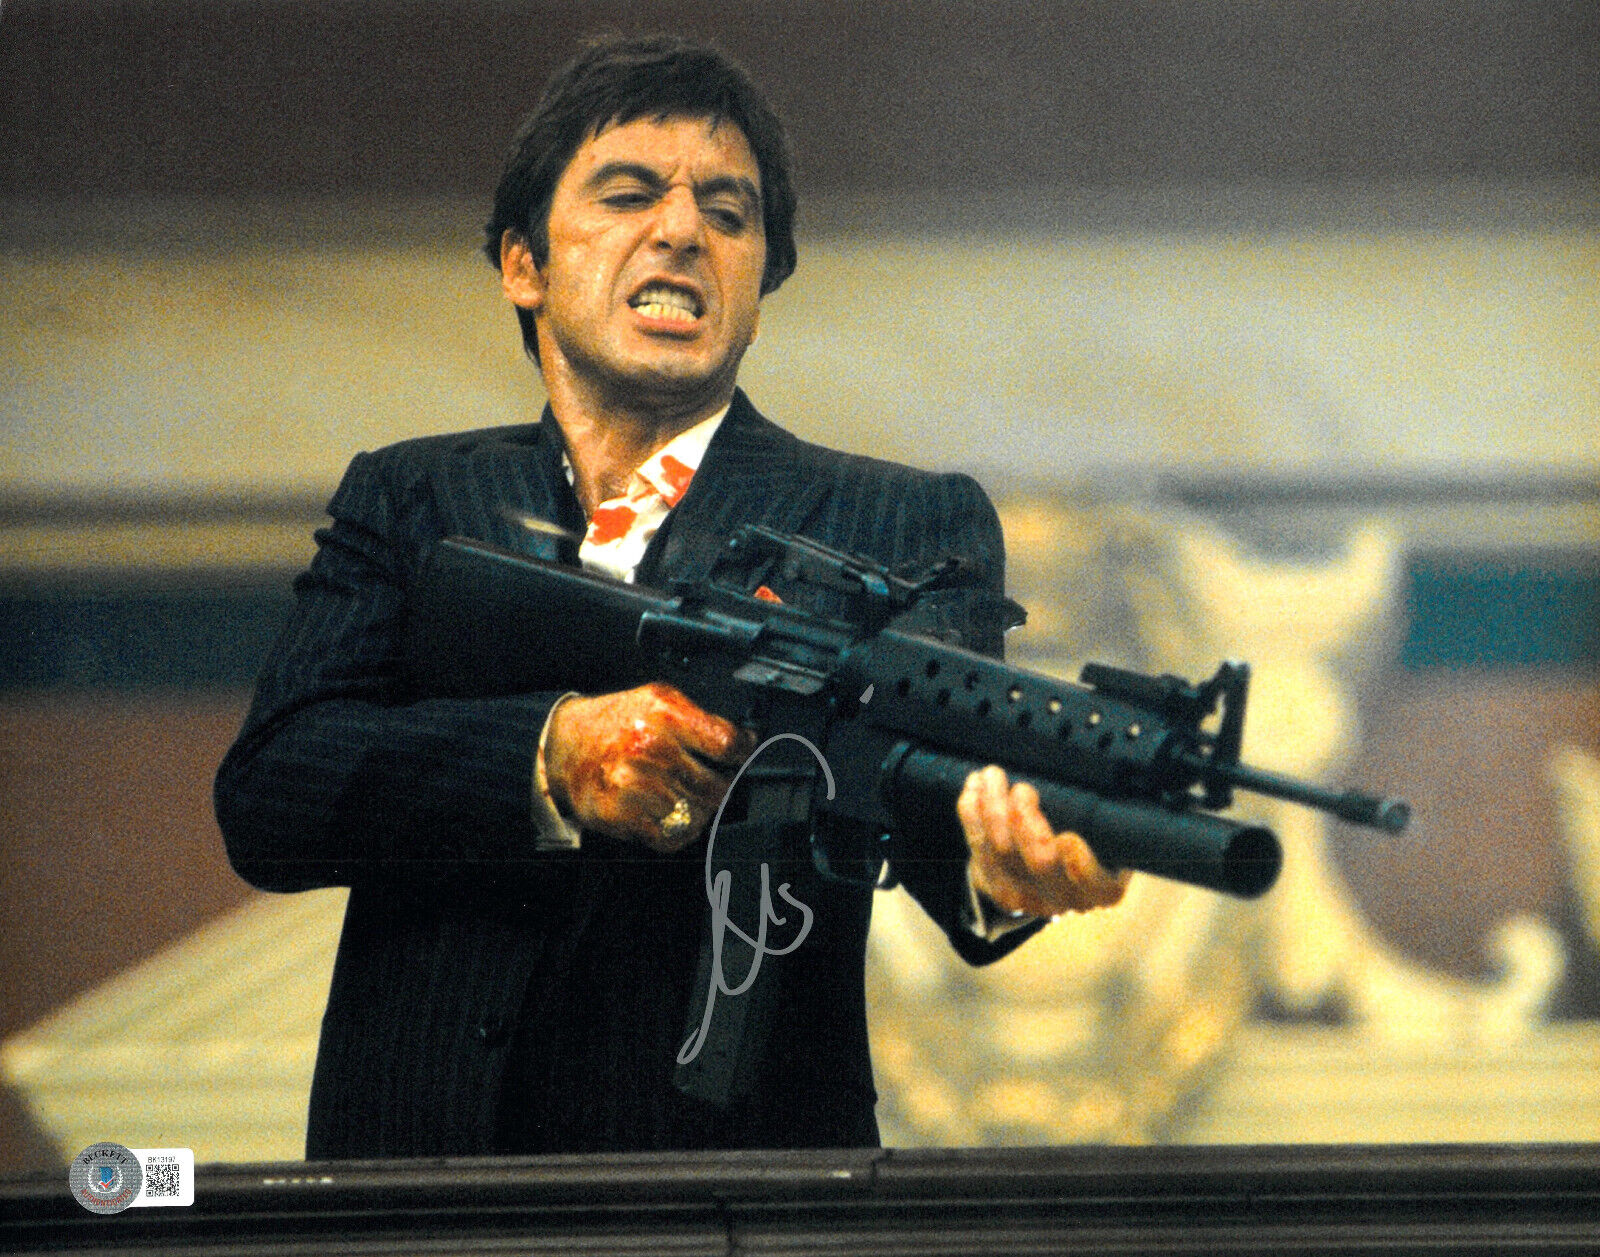 AL PACINO SIGNED SCARFACE 'WITH GUN' AUTOGRAPHED 11X14 PHOTO BAS BECKETT